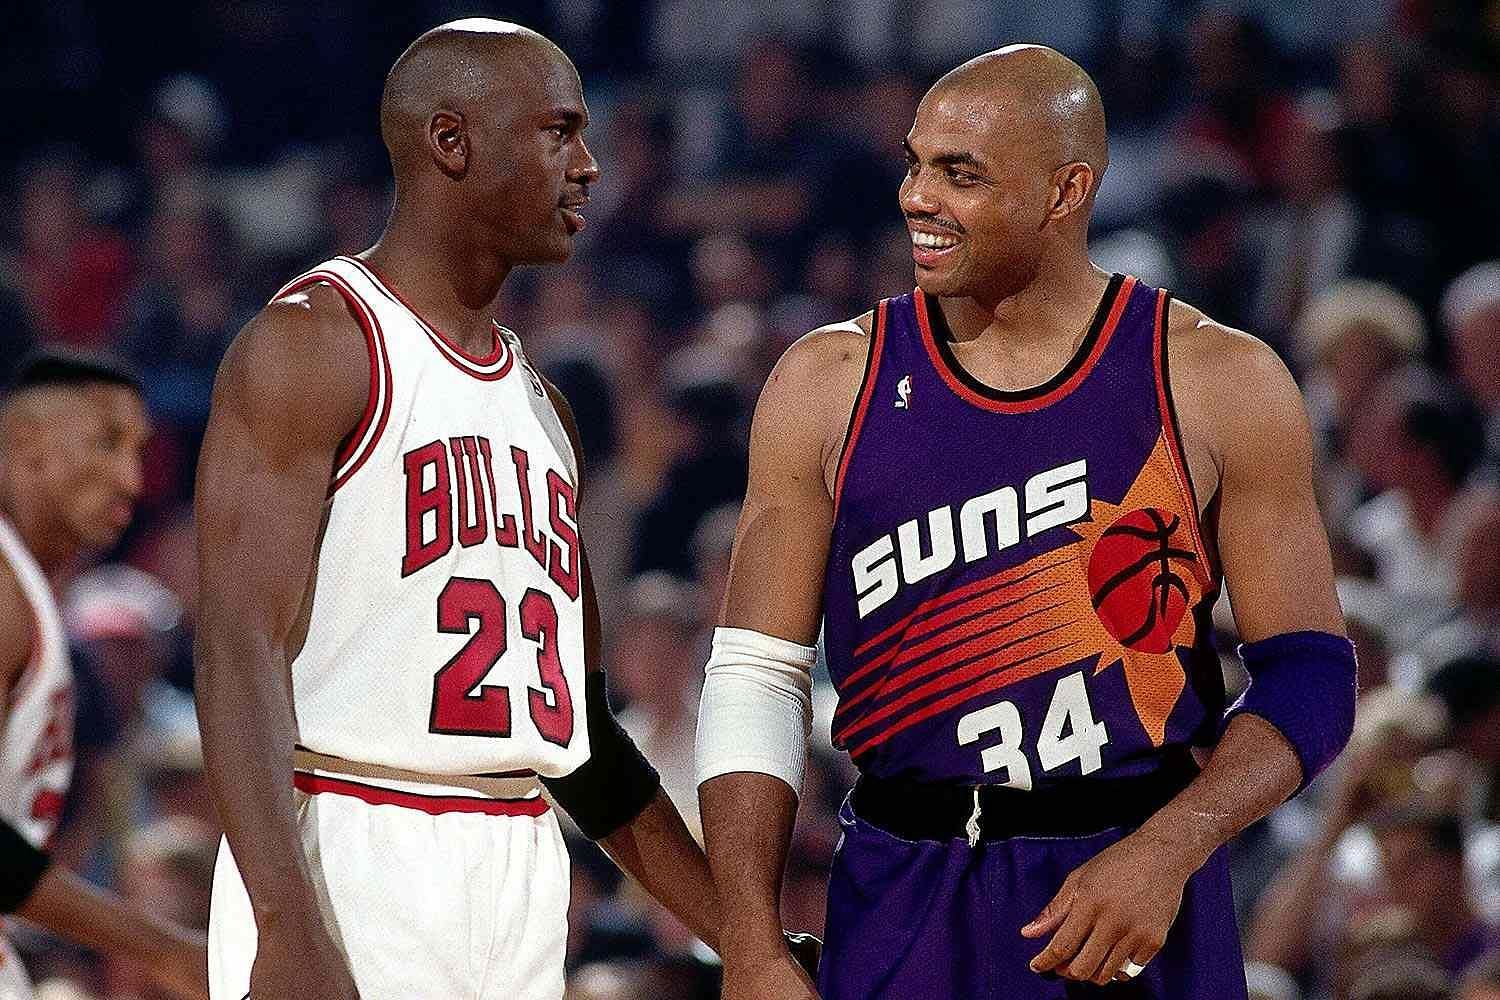 Michael Jordan and Charles Barkley were once close friends